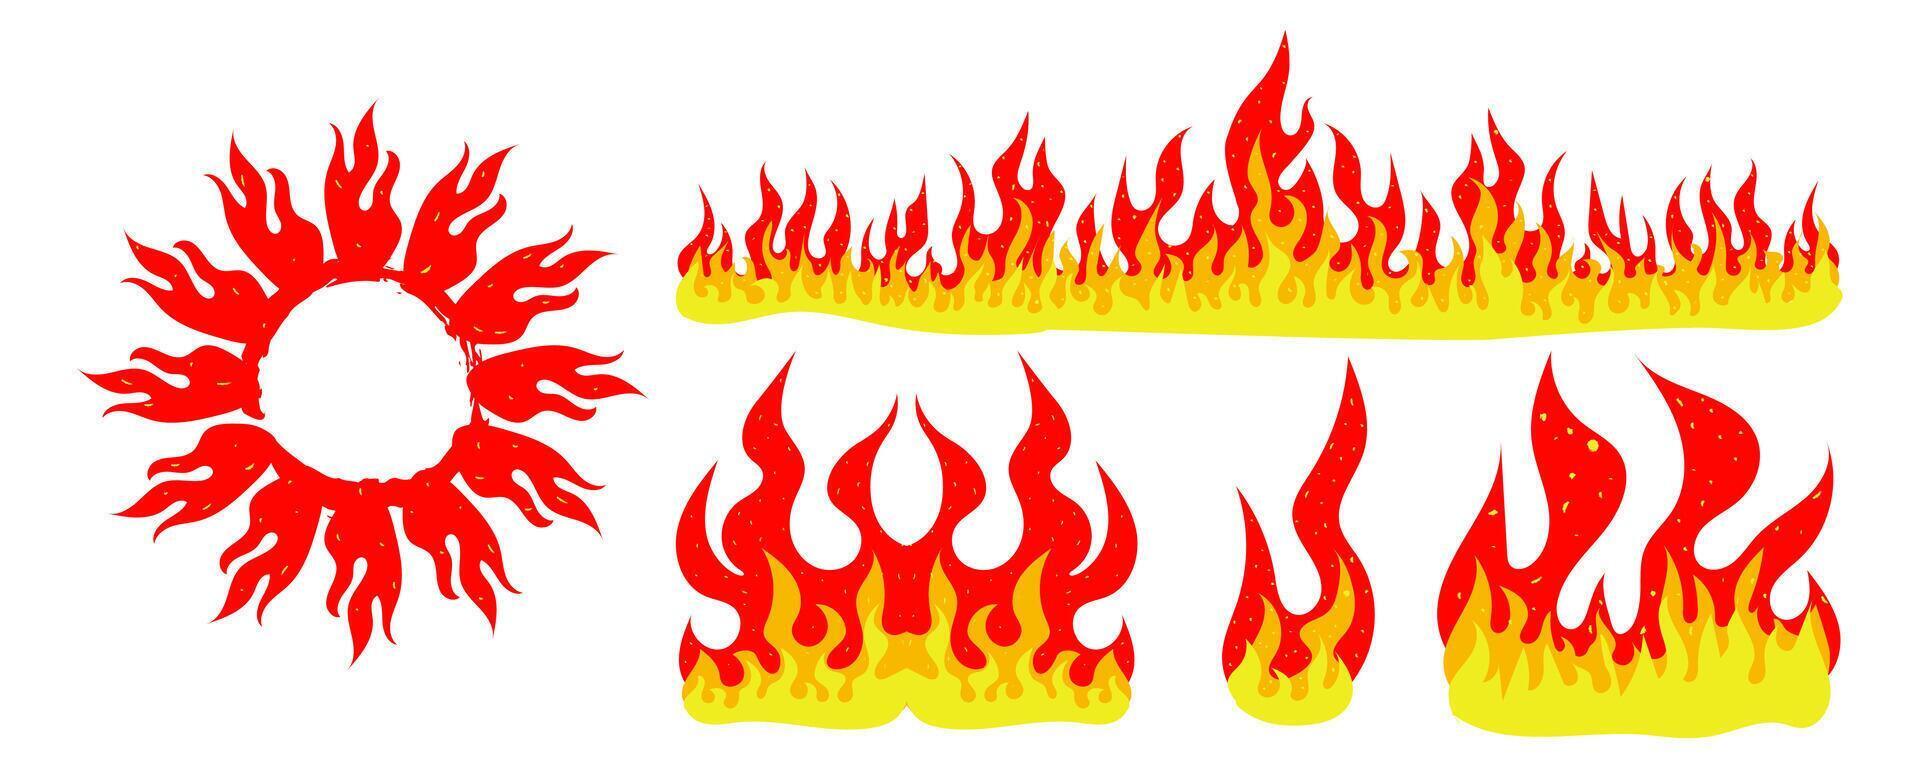 Set of fire cartoon illustrations, fire crowns, fire frames, fire elements, grunge fire. Vector illustration for collages, posters, banners.